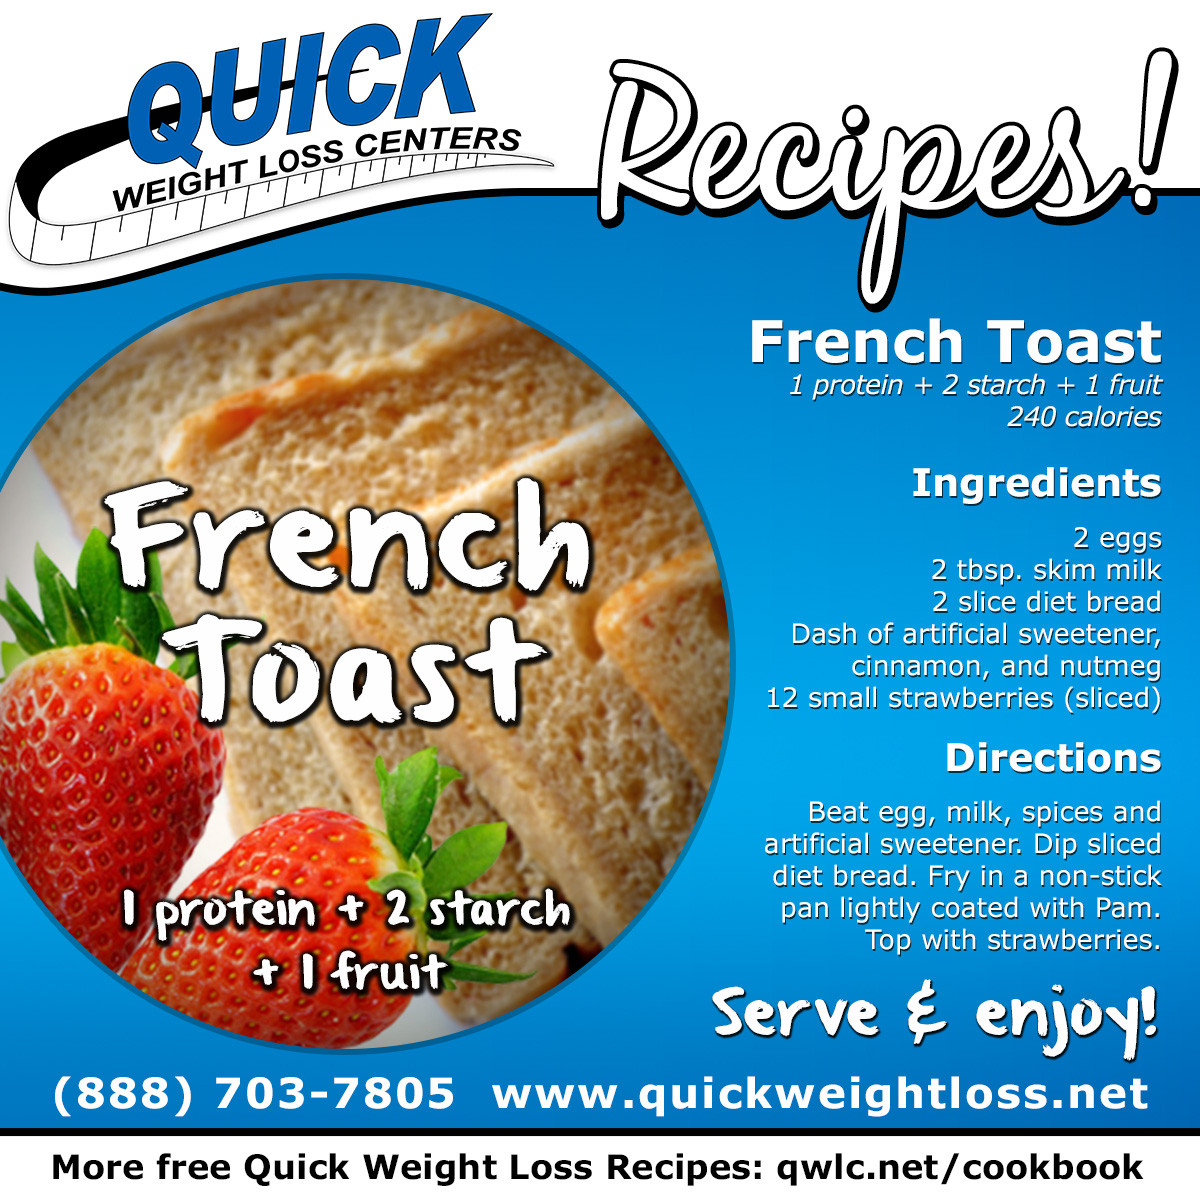 Quick Weight Loss Center Recipes
 Quick Weight Loss Centers Quick Weight Loss Centers